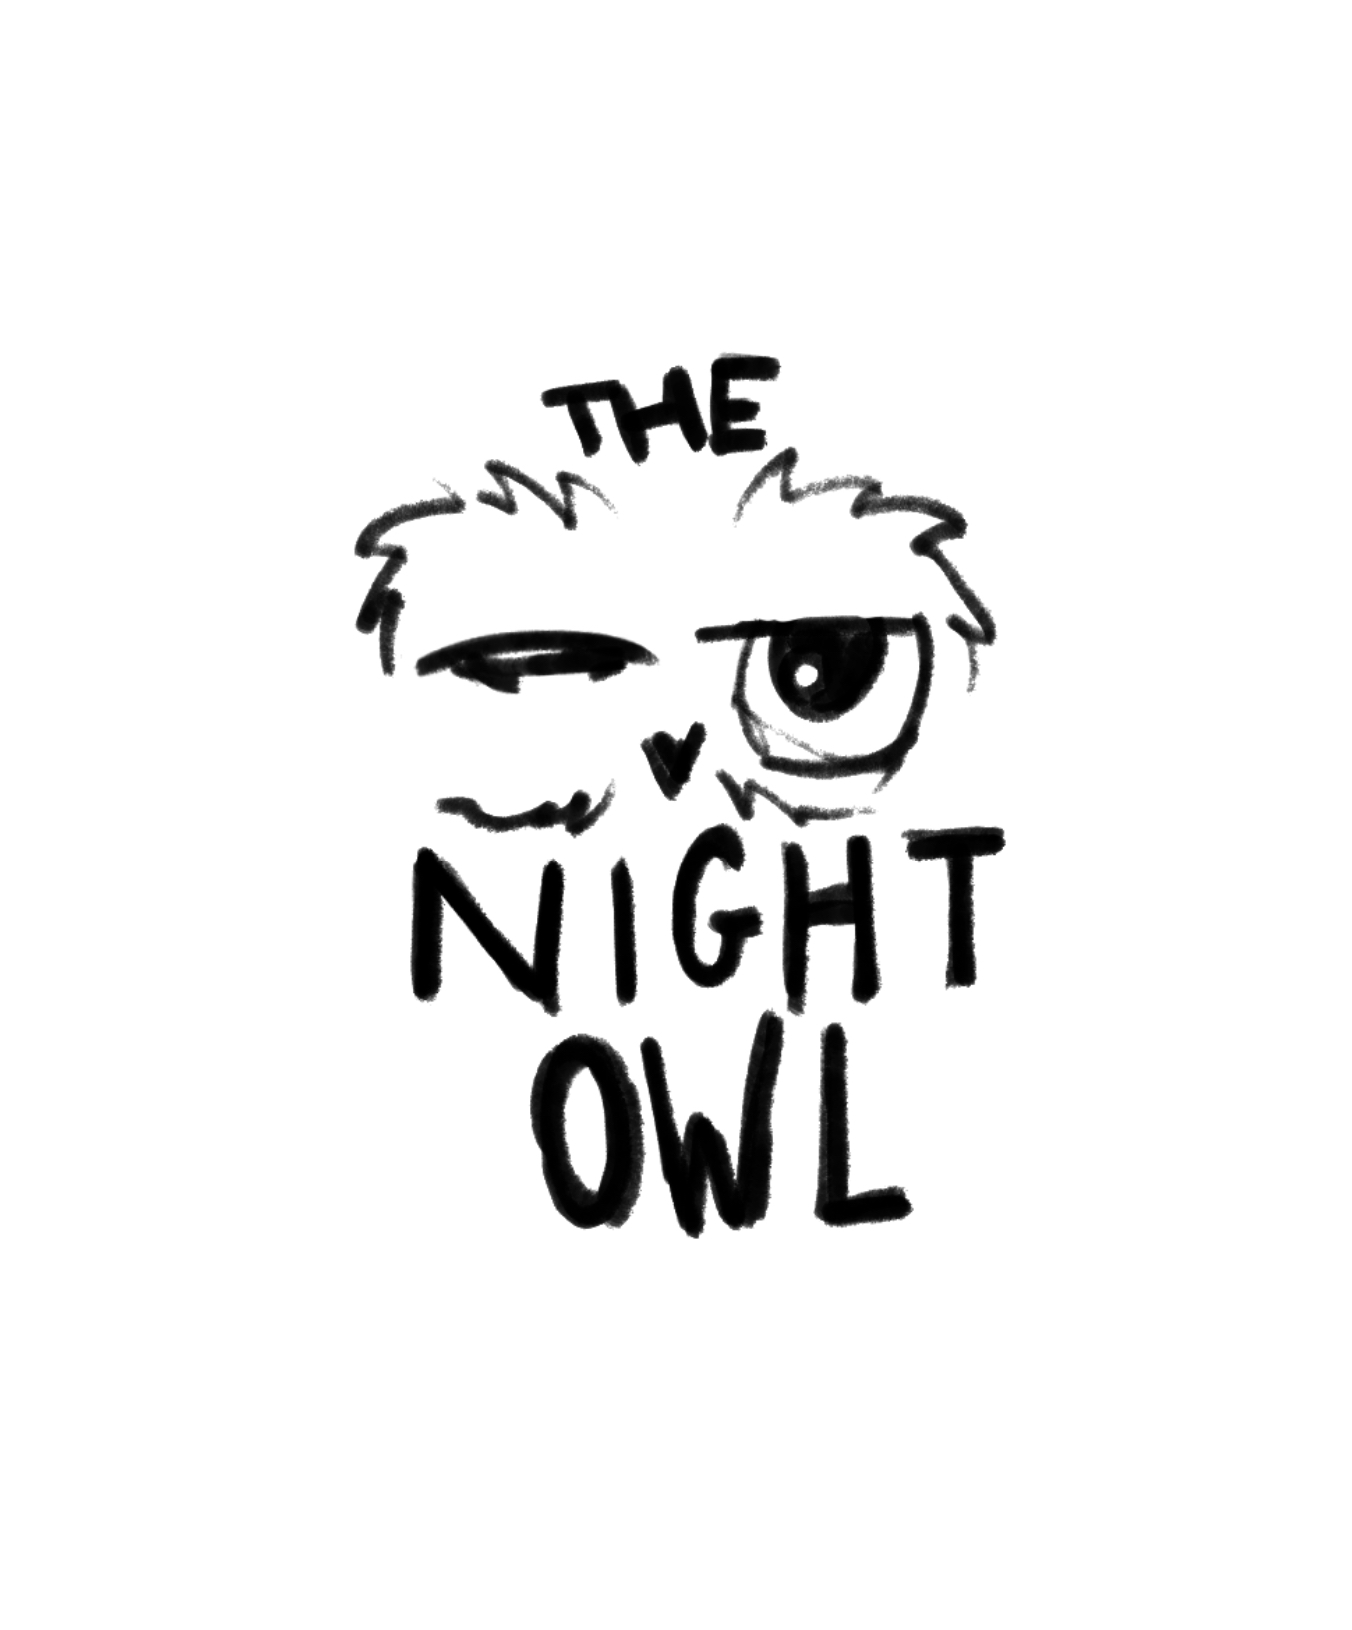 The words The Night Owl are nestled on either side of an illustrated winking owl face